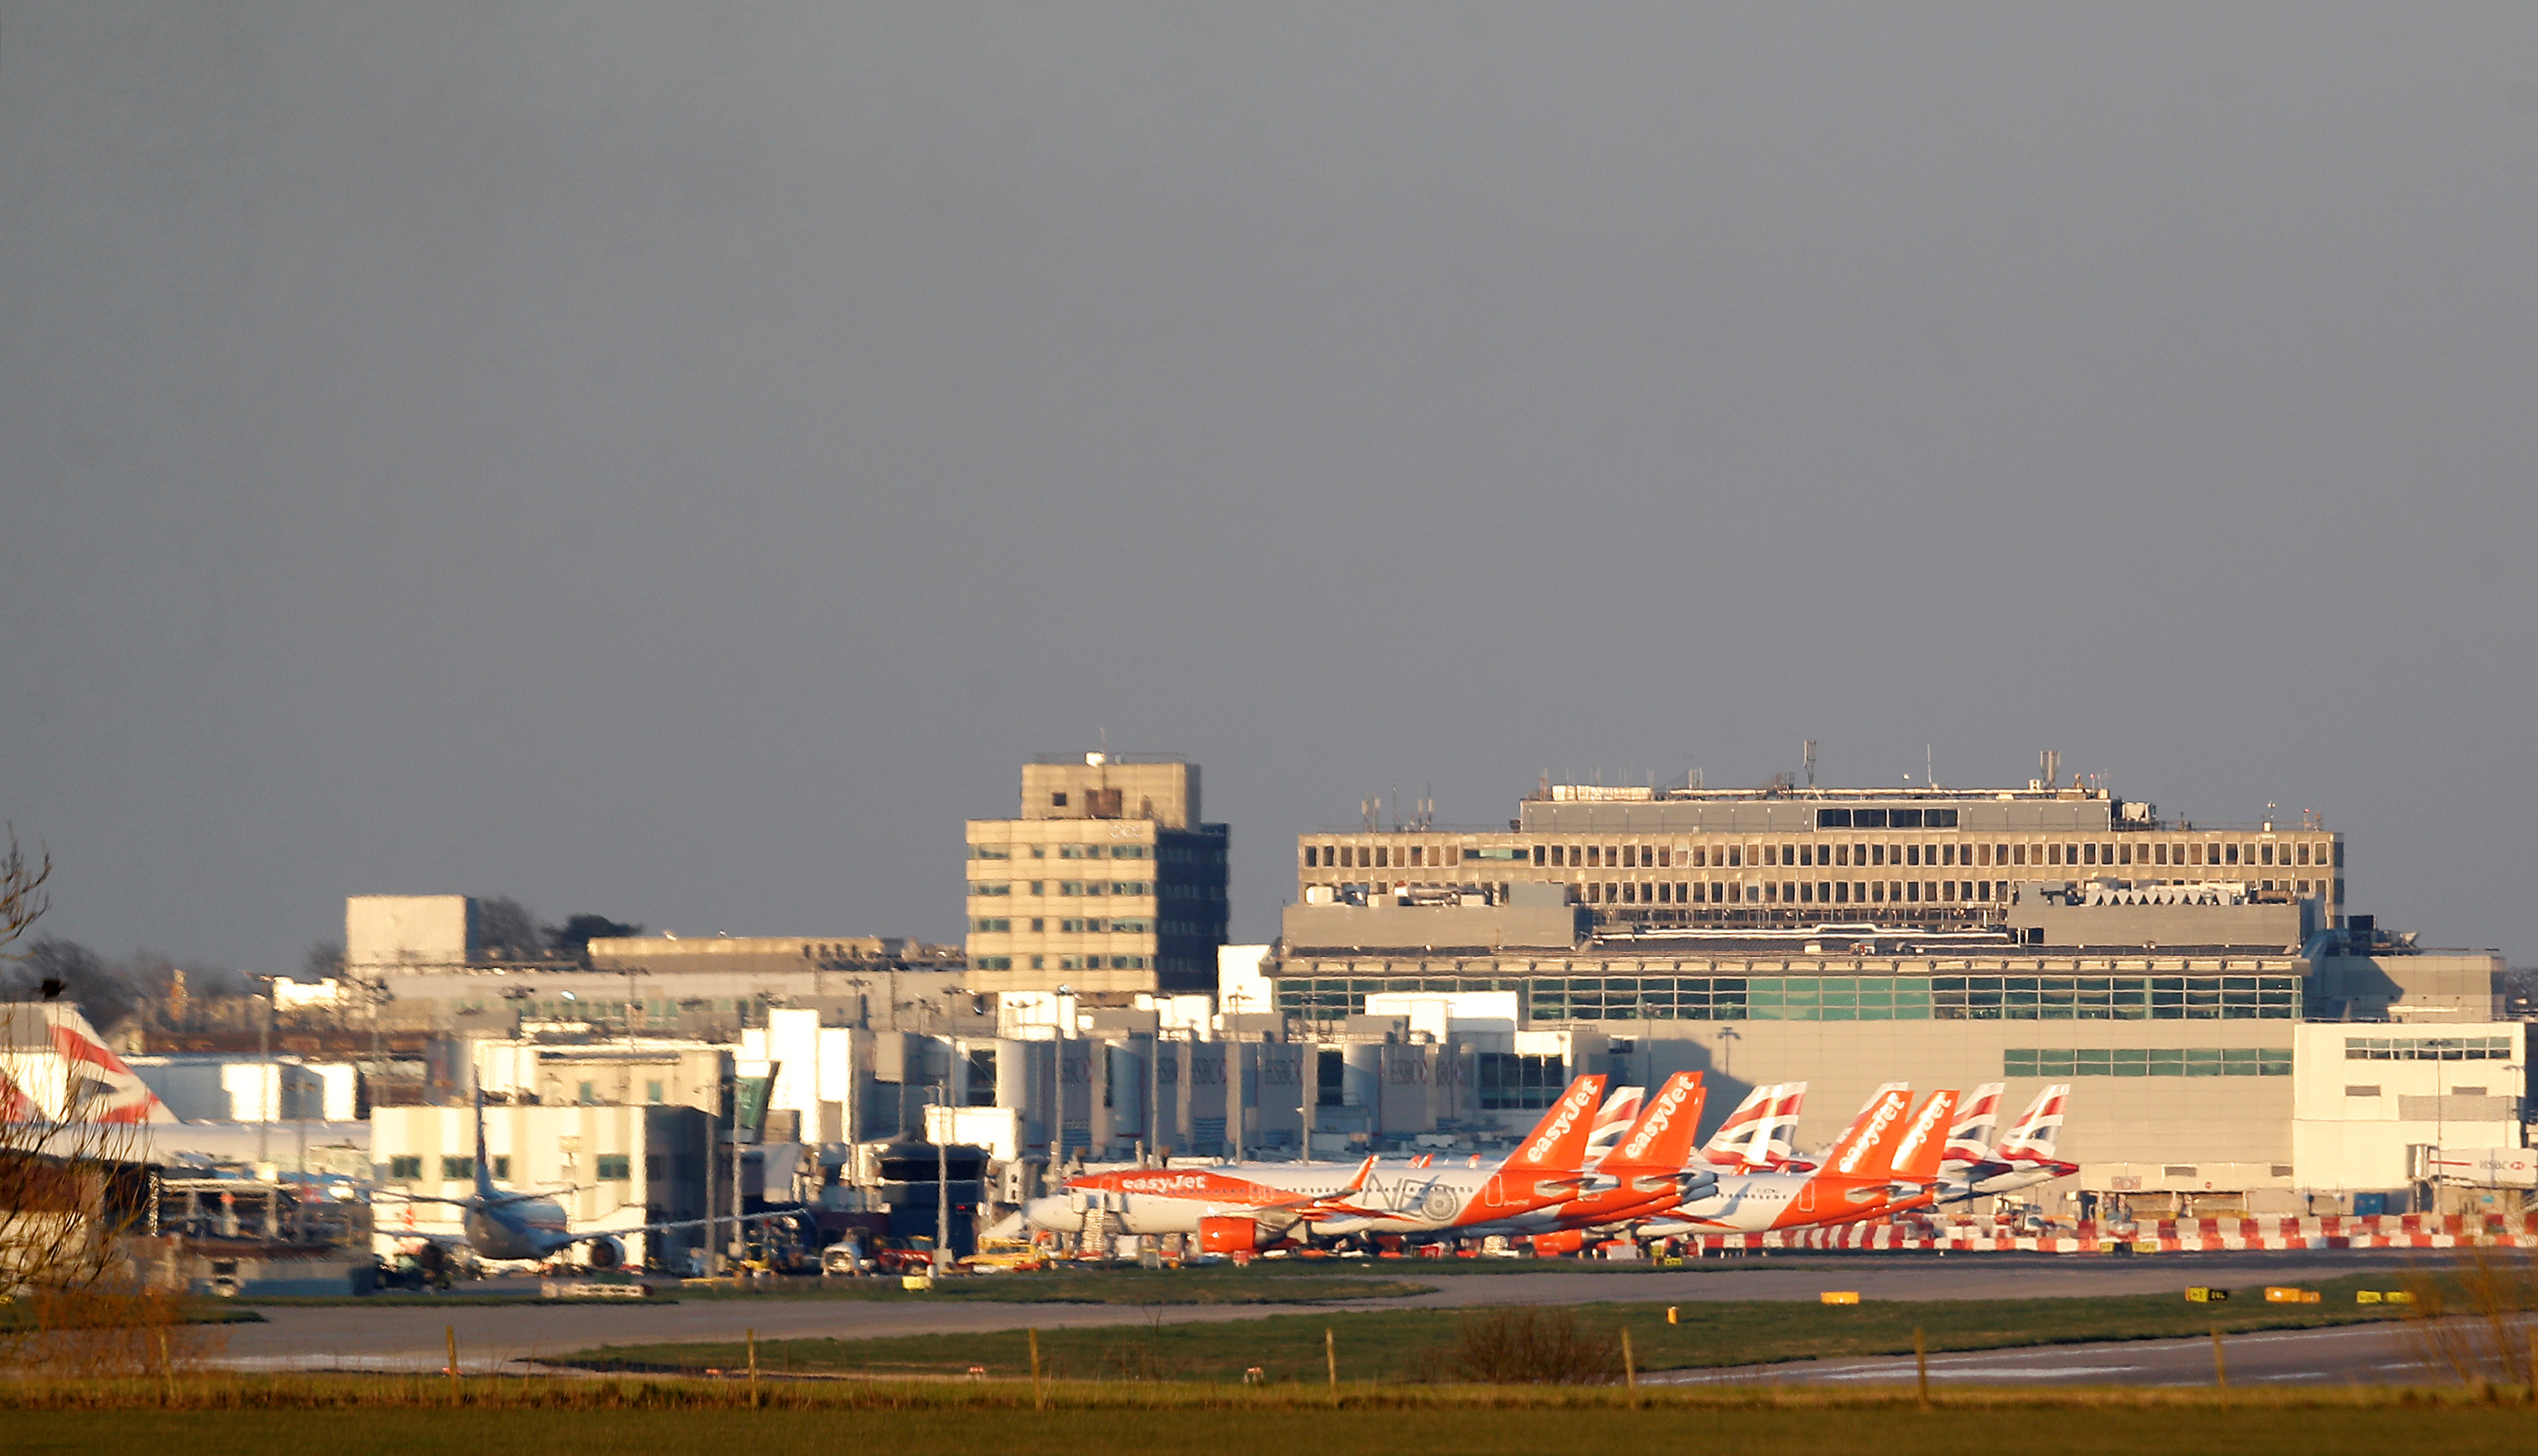 Easyjet and British Airways planes are pictured at Gatwick airport